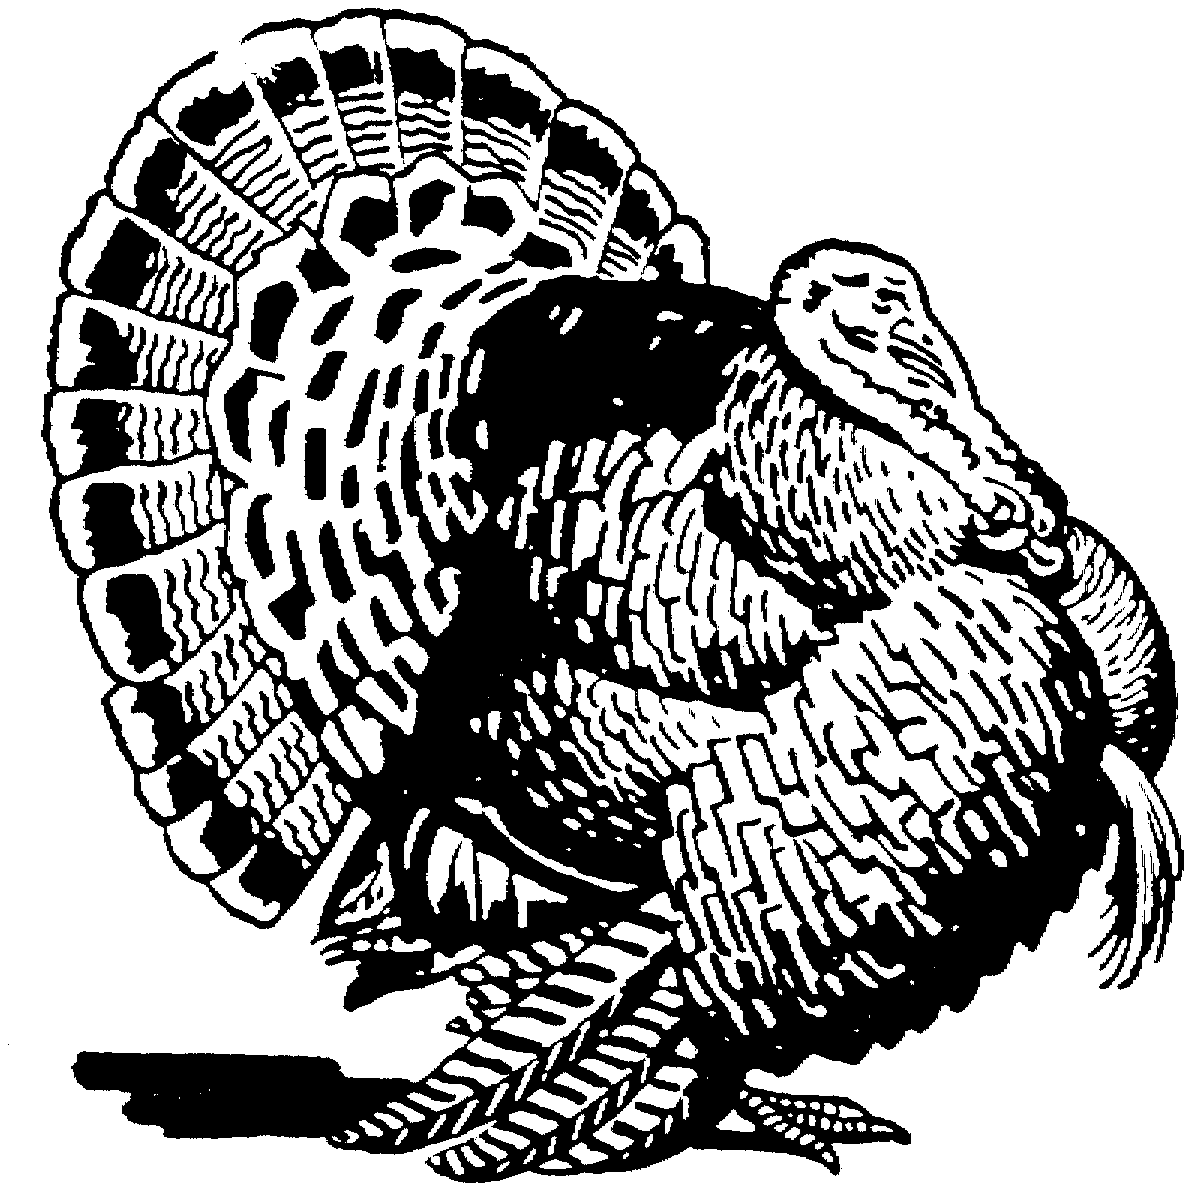 Wild Turkey Coloring Page - Coloring Home